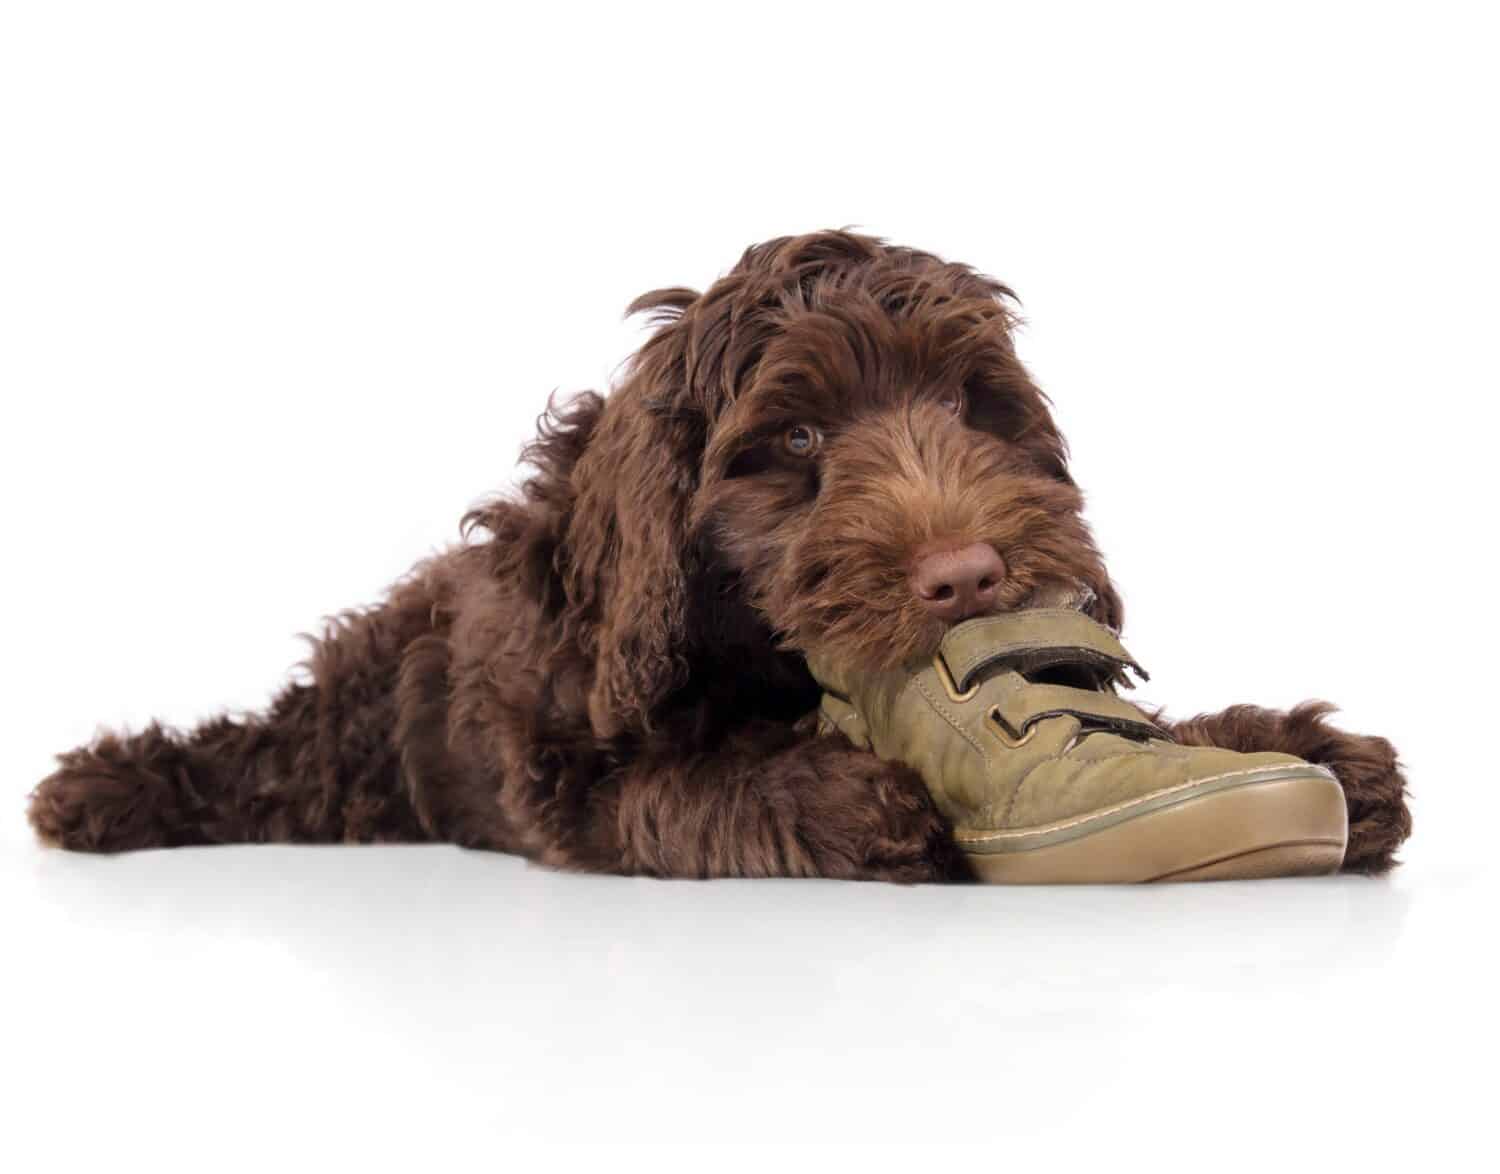 Isolated puppy dog chewing shoe. Happy puppy lying with shoe between paws while eating, playing inhaling or destroying it. 3 months old female labradoodle dog, chocolate or brown. Selective focus.